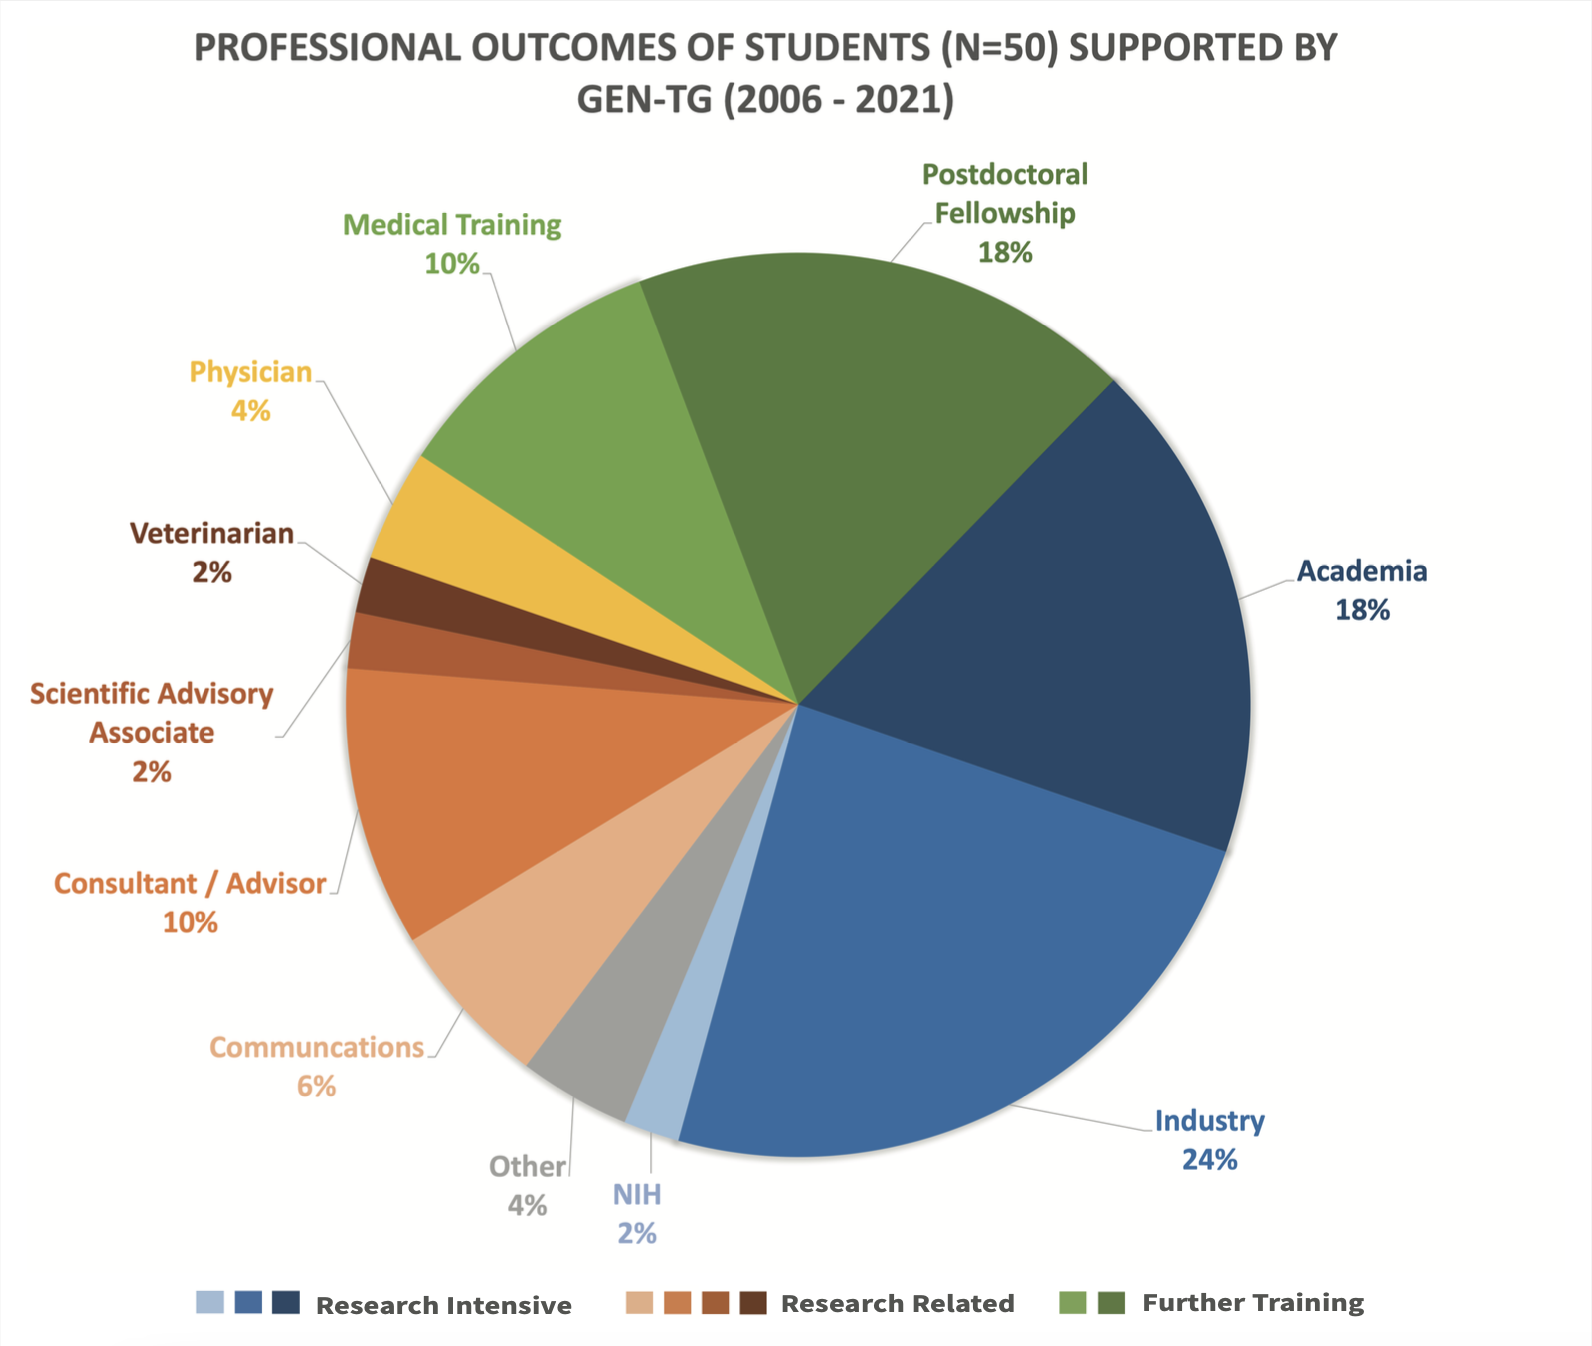 Professional Outcomes of Students Supported by GEN-TG